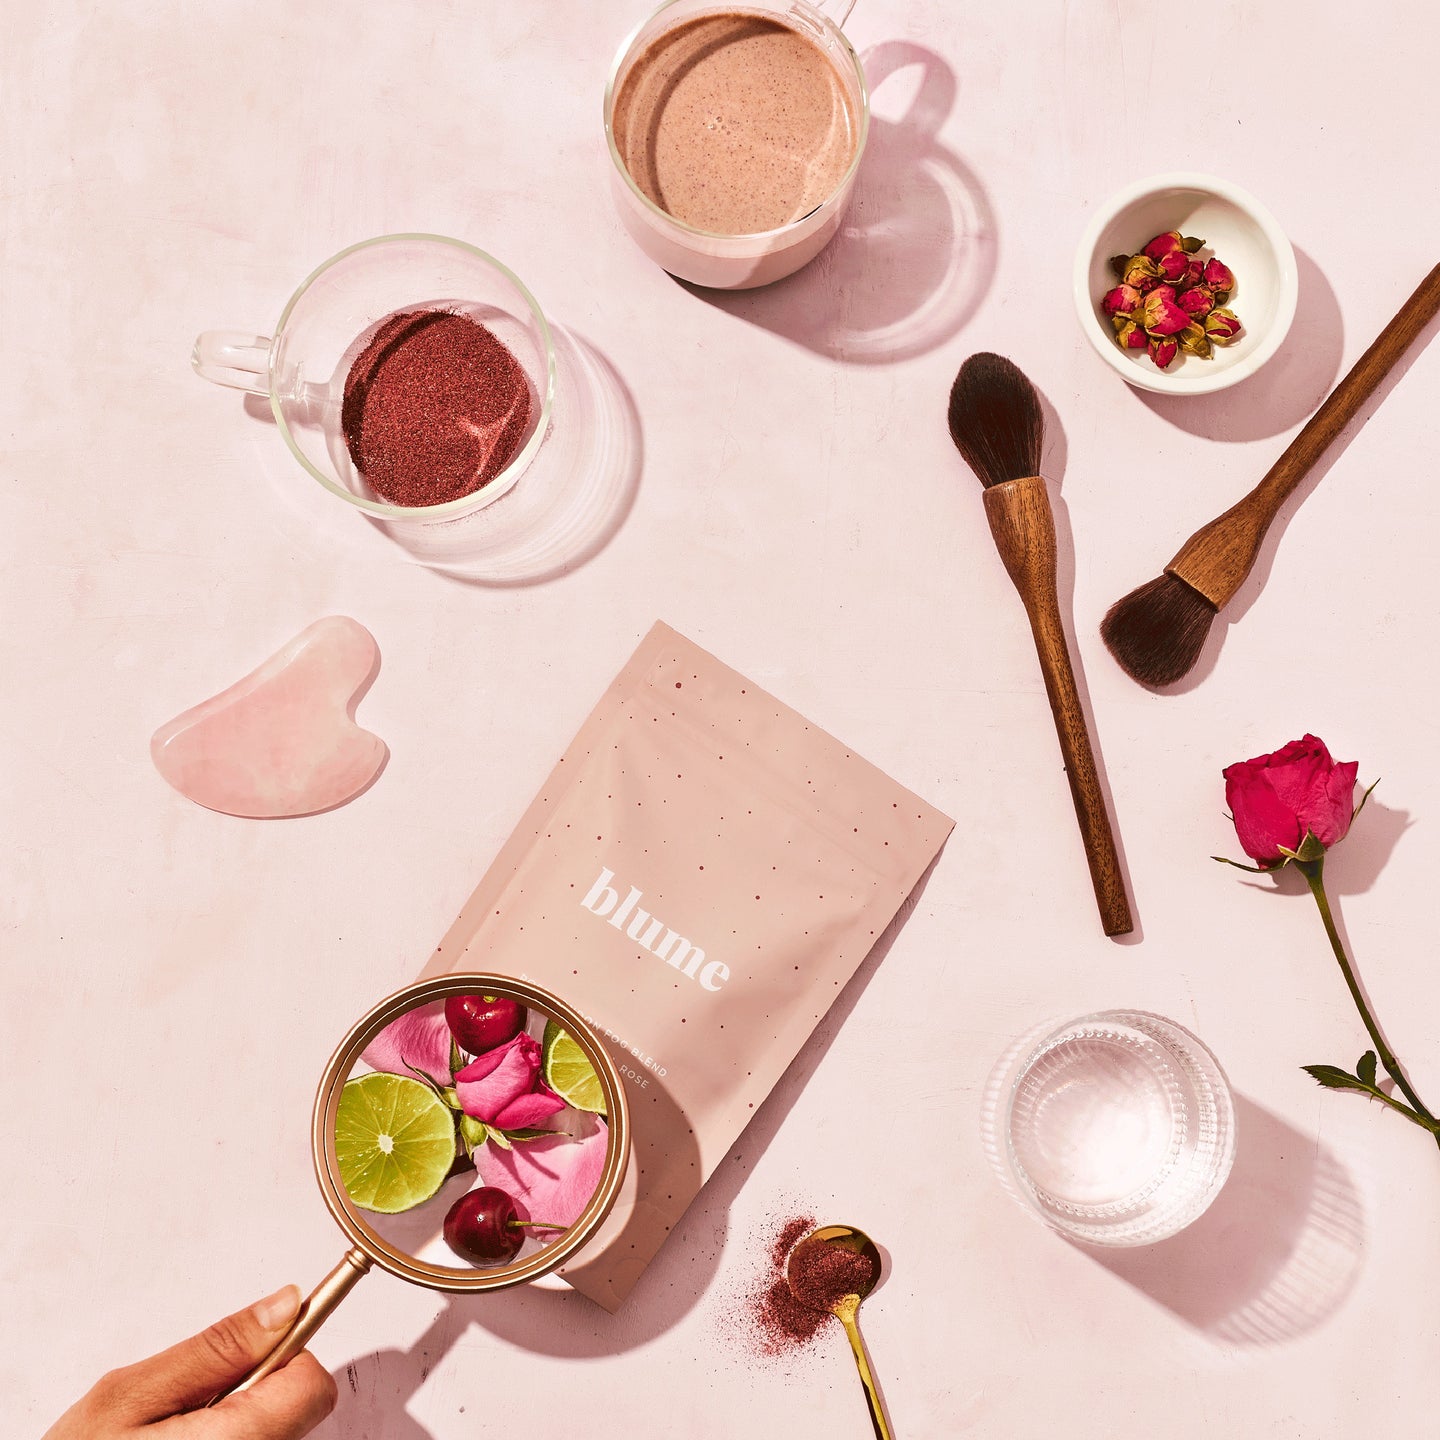 A bag of Blume Rose London Fog surrounded by glass cups, a Gua Sha, makeup brushes, flowers on a pink background 